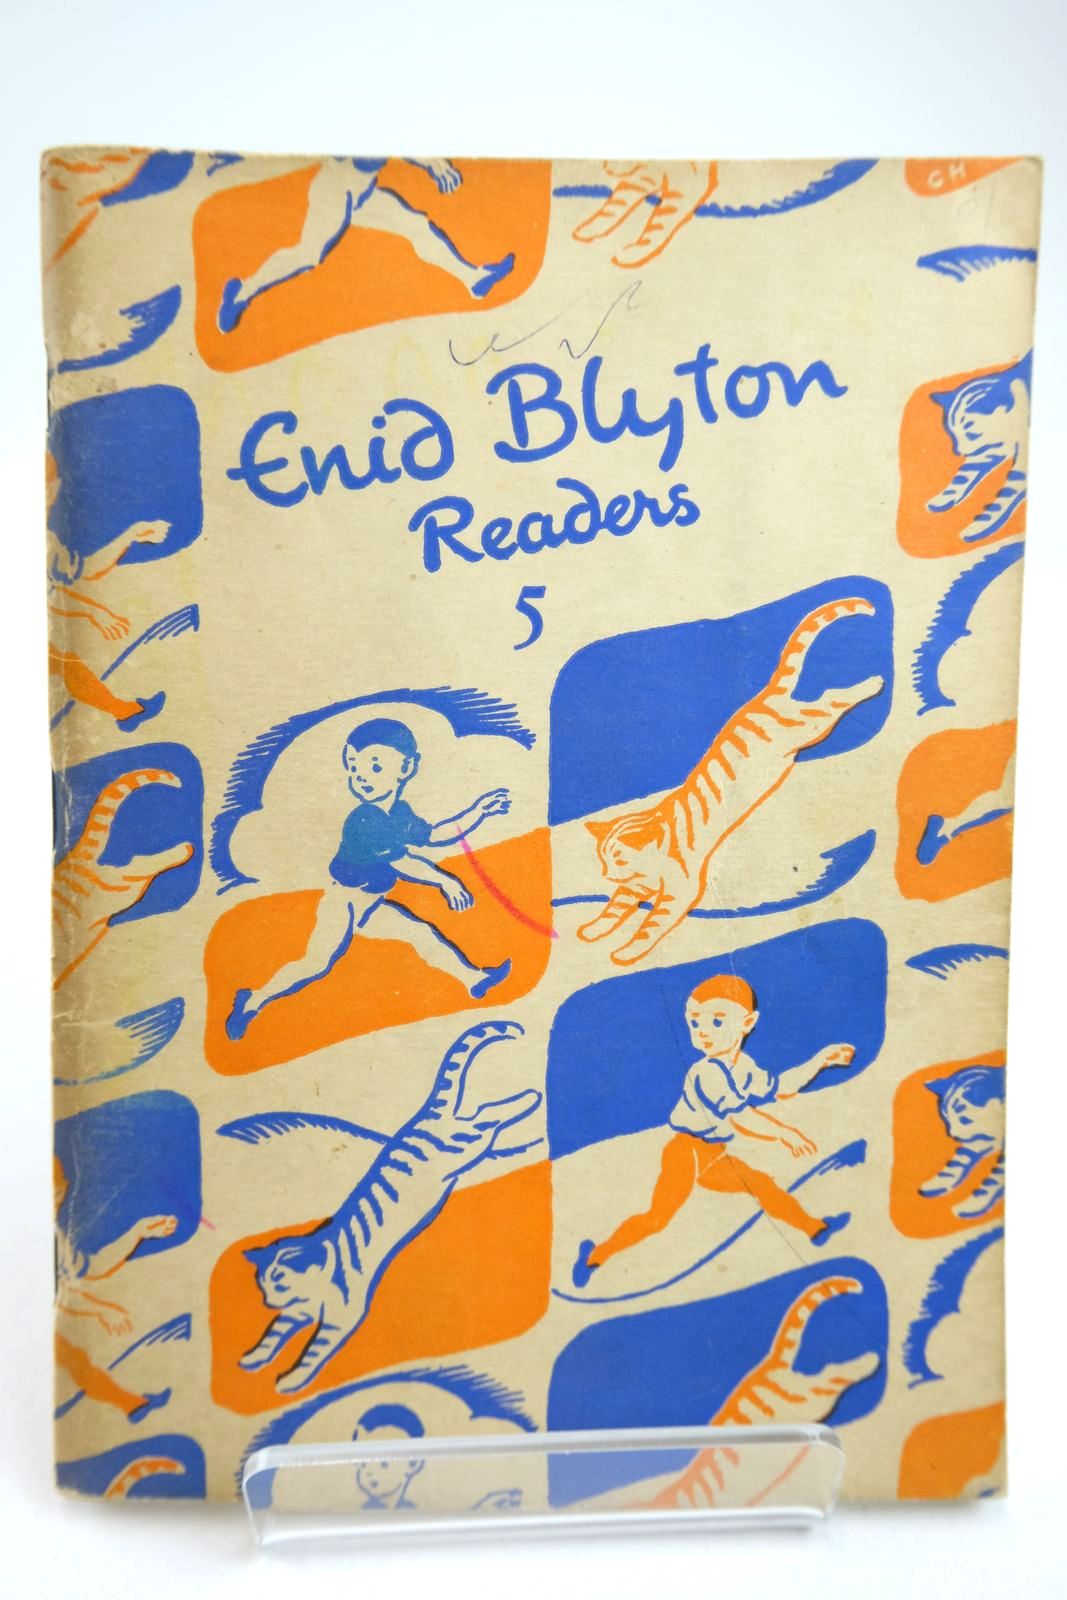 Photo of ENID BLYTON READERS 5 written by Blyton, Enid illustrated by Soper, Eileen published by Macmillan &amp; Co. Ltd. (STOCK CODE: 2133409)  for sale by Stella & Rose's Books